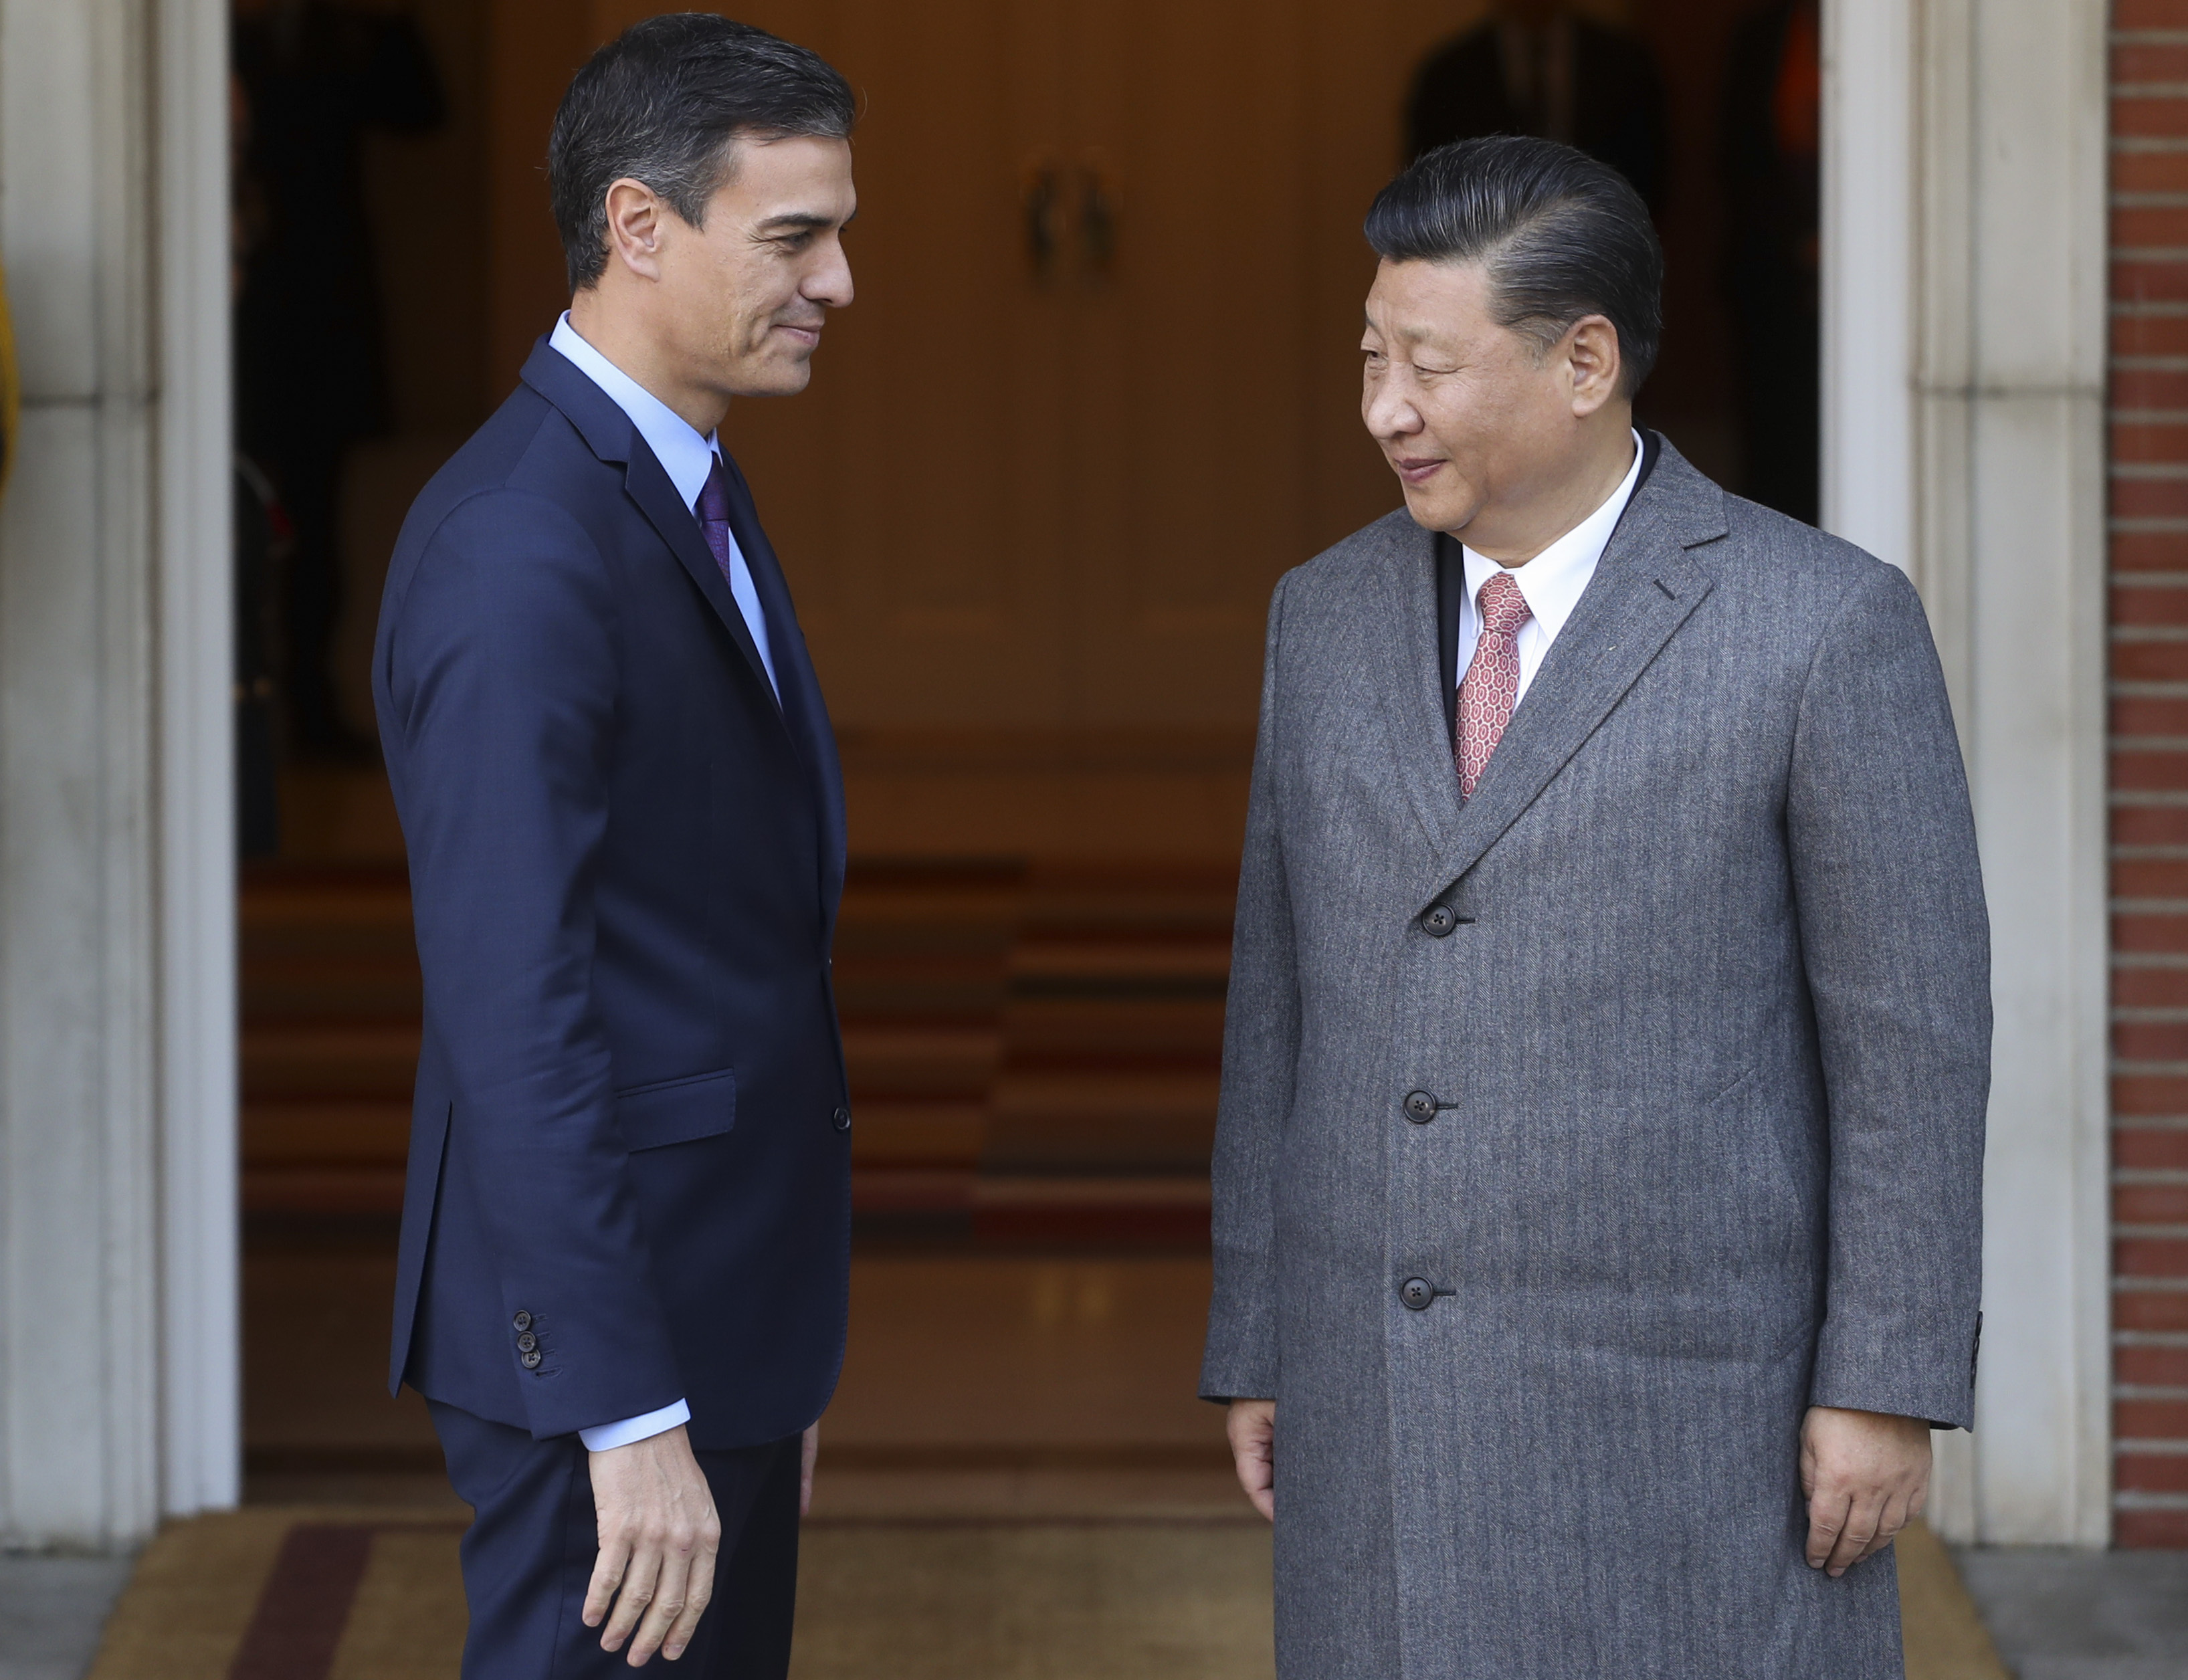 China's President Xi Jinping stands next to Spain's Prime Minister Pedro Sanchez as he arrived for a meeting at the Moncloa palace in Madrid